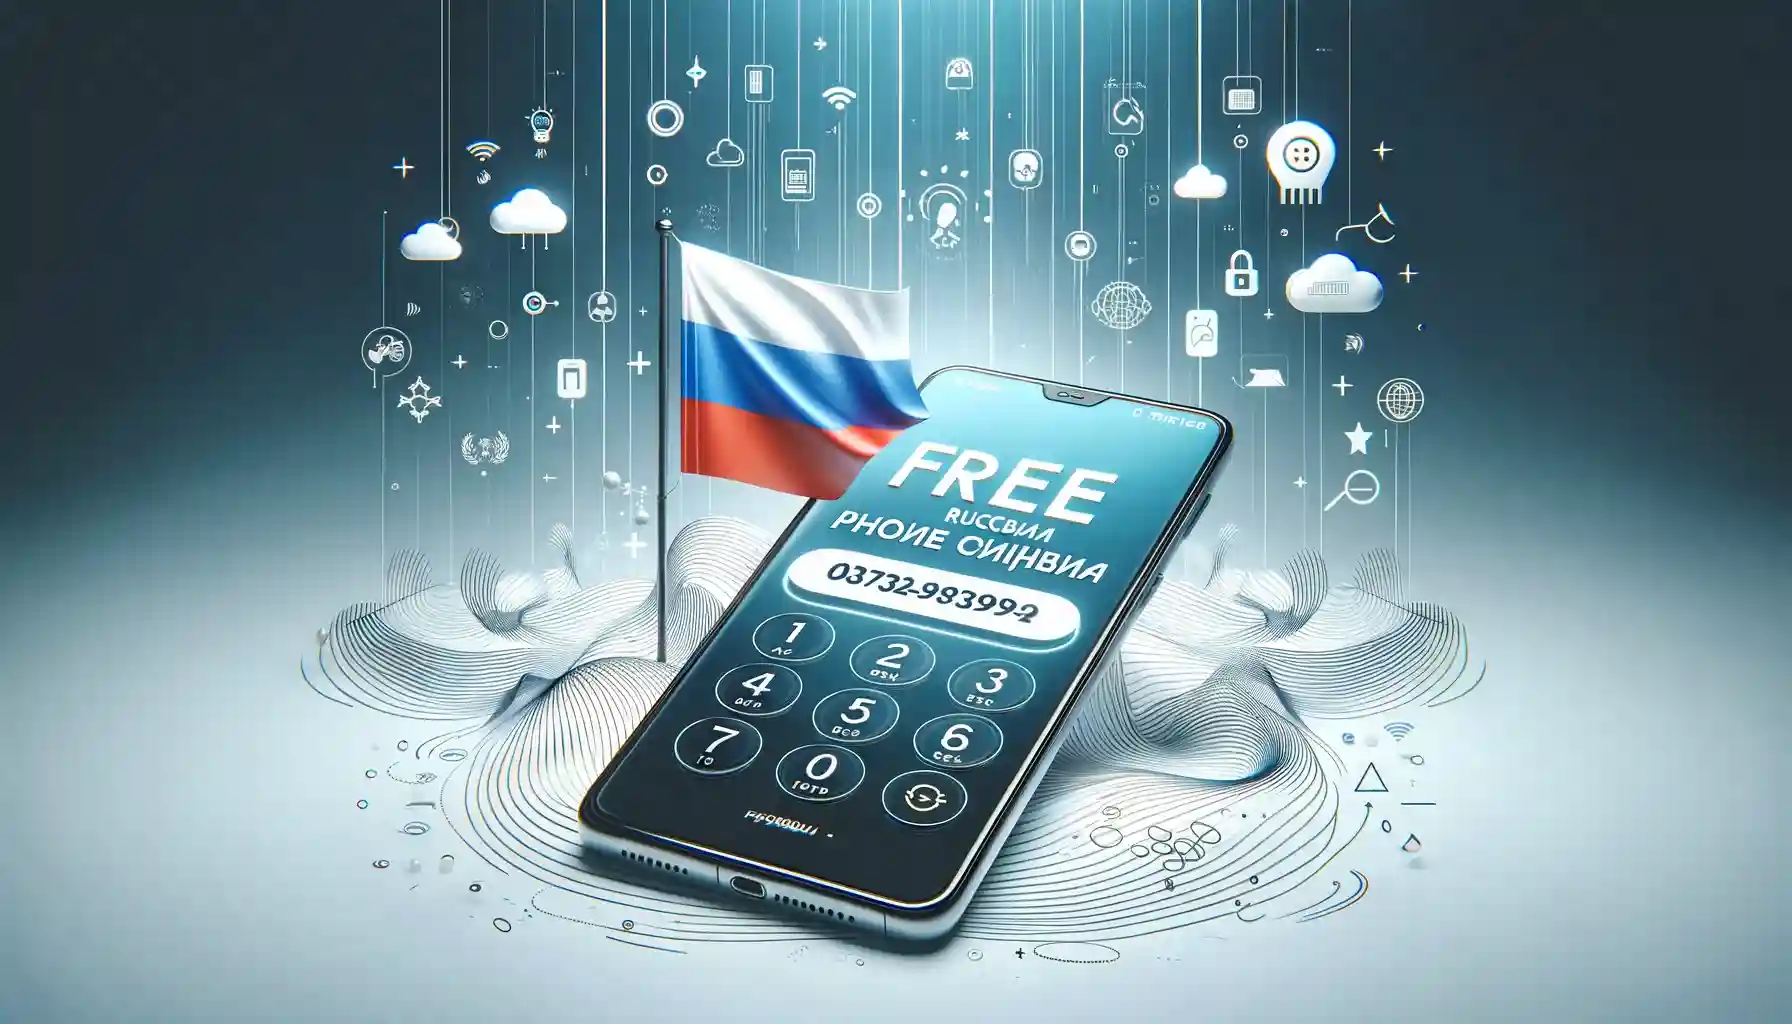 privacy and security with a free russian phone number